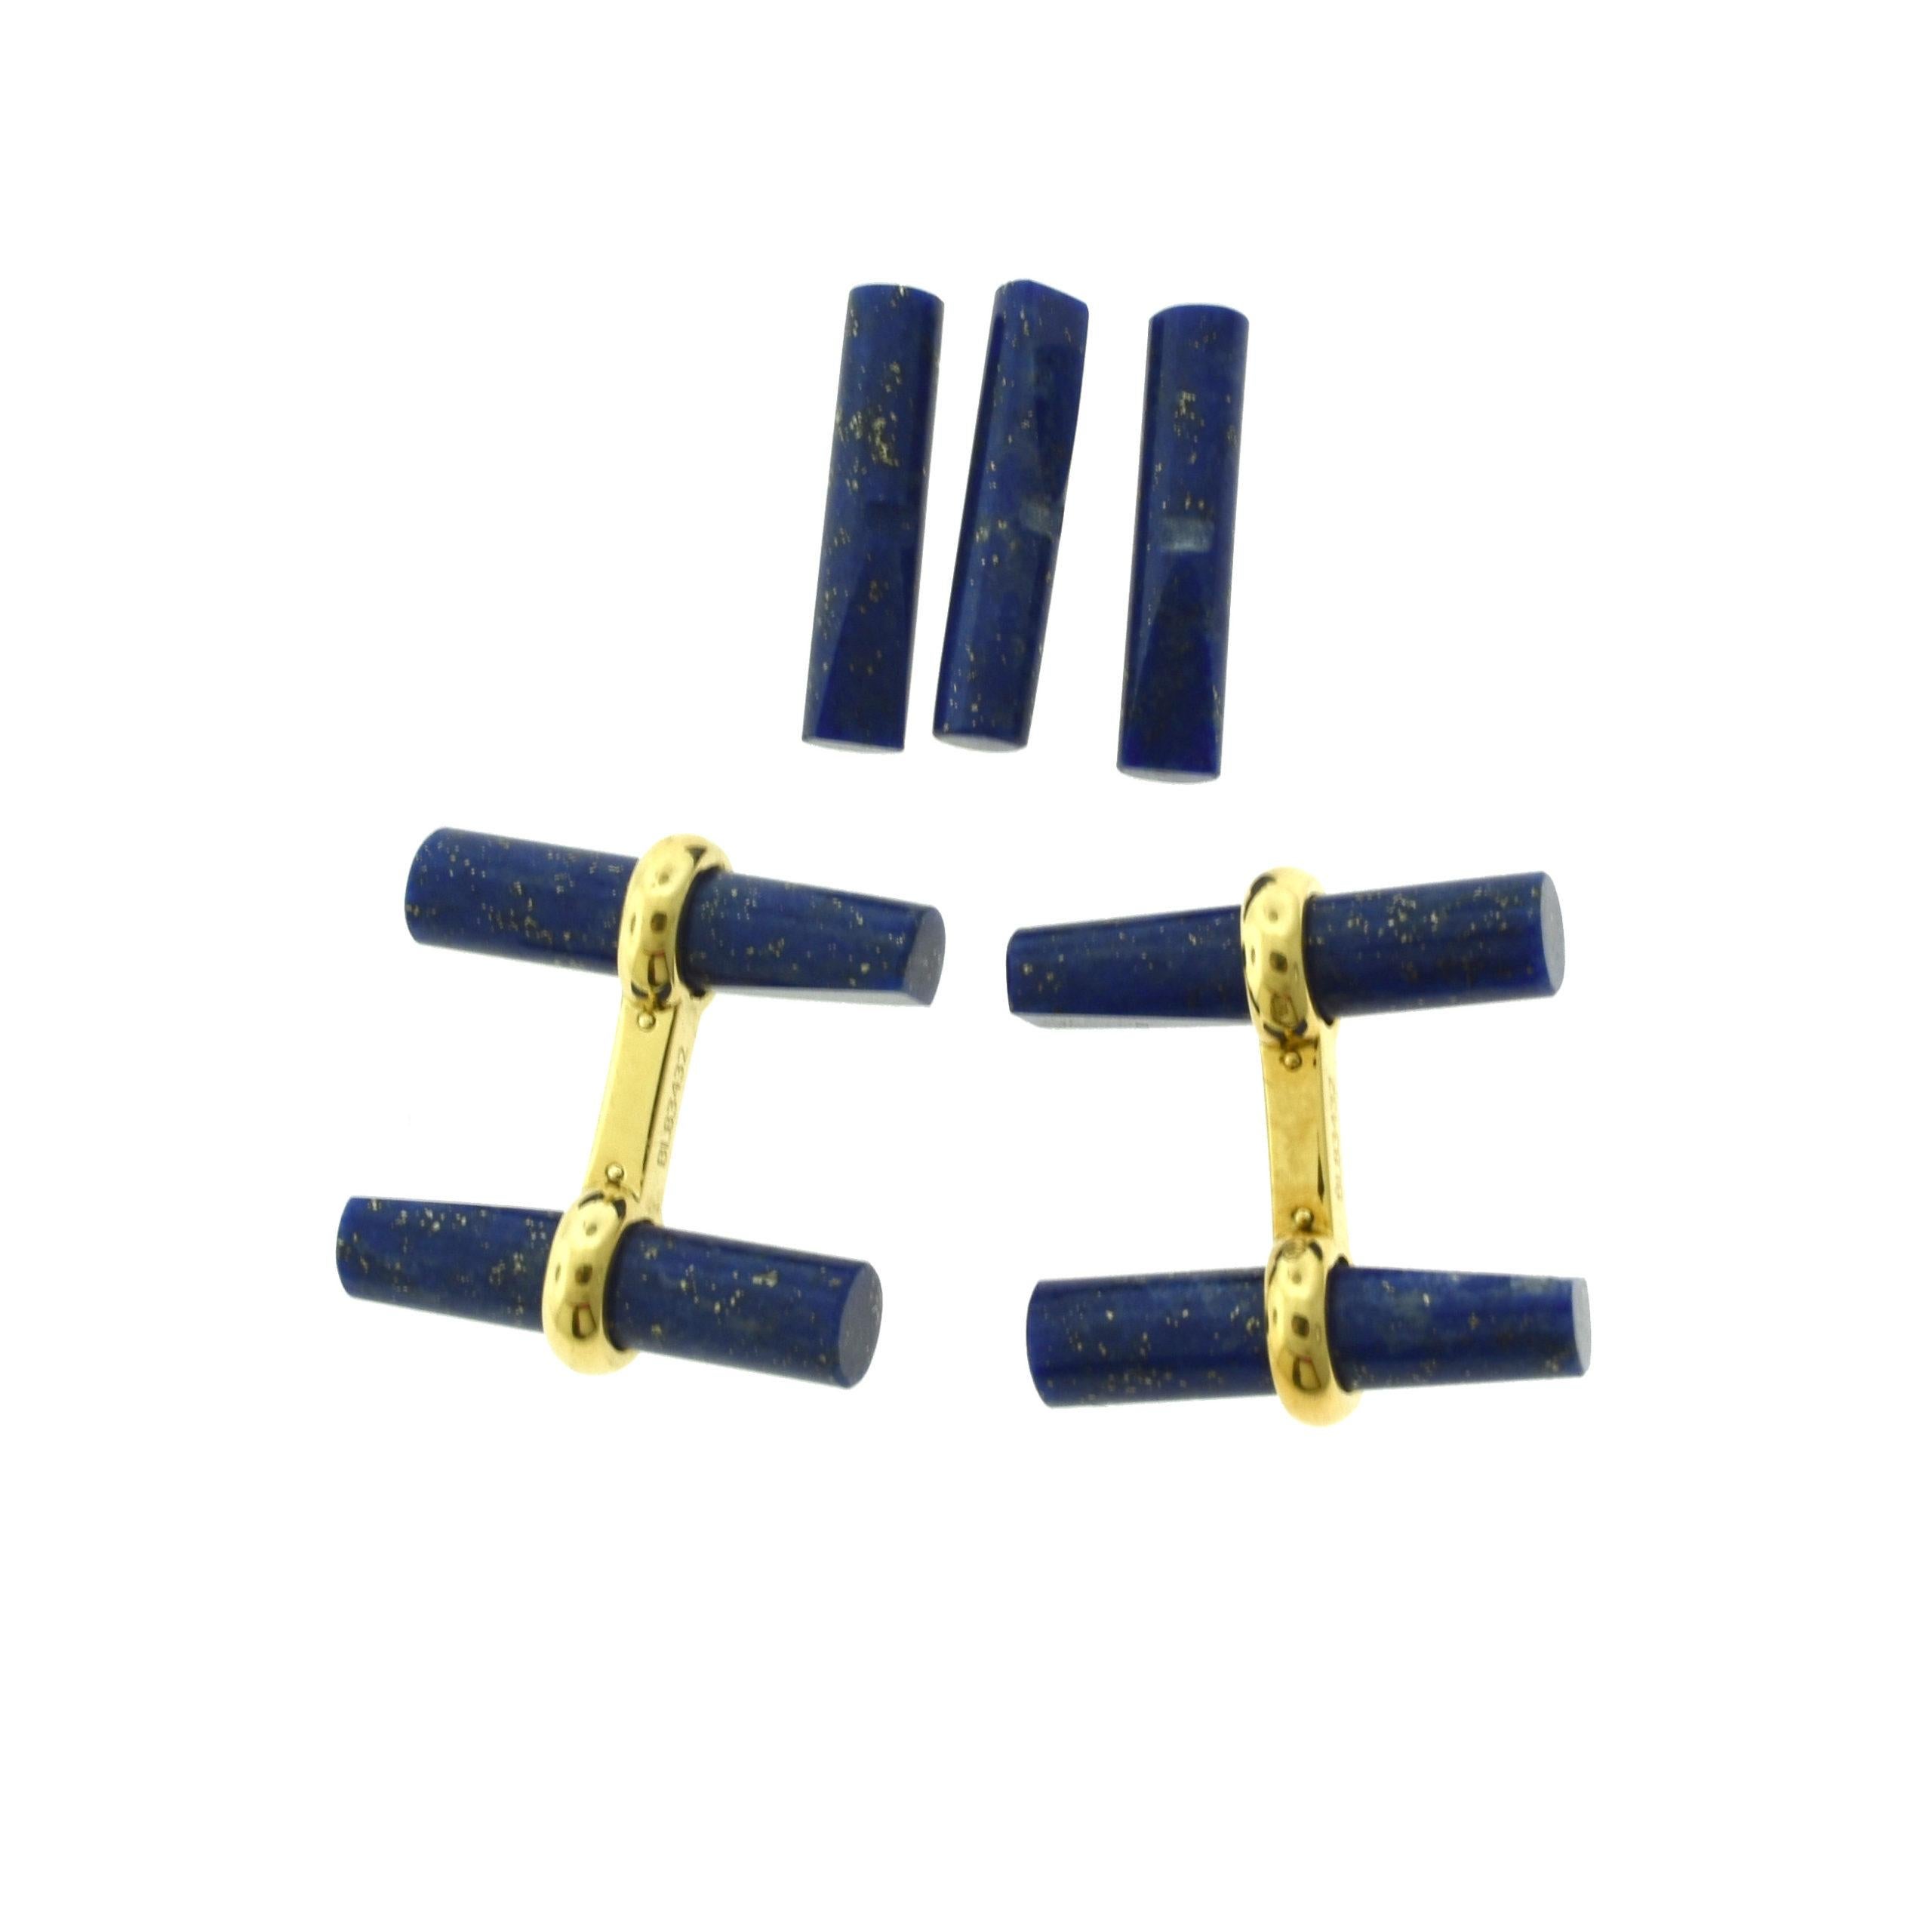 Brilliance Jewels, Miami
Questions? Call Us Anytime!
786,482,8100

Designer: Van Cleef & Arpels

Style: Battonet Cufflink, and 3 Piece Stud Set

Metal: Yellow Gold

Metal Purity: 18k

Stones: Lapis Lazuli Batonnet

Total Item Weight (grams):